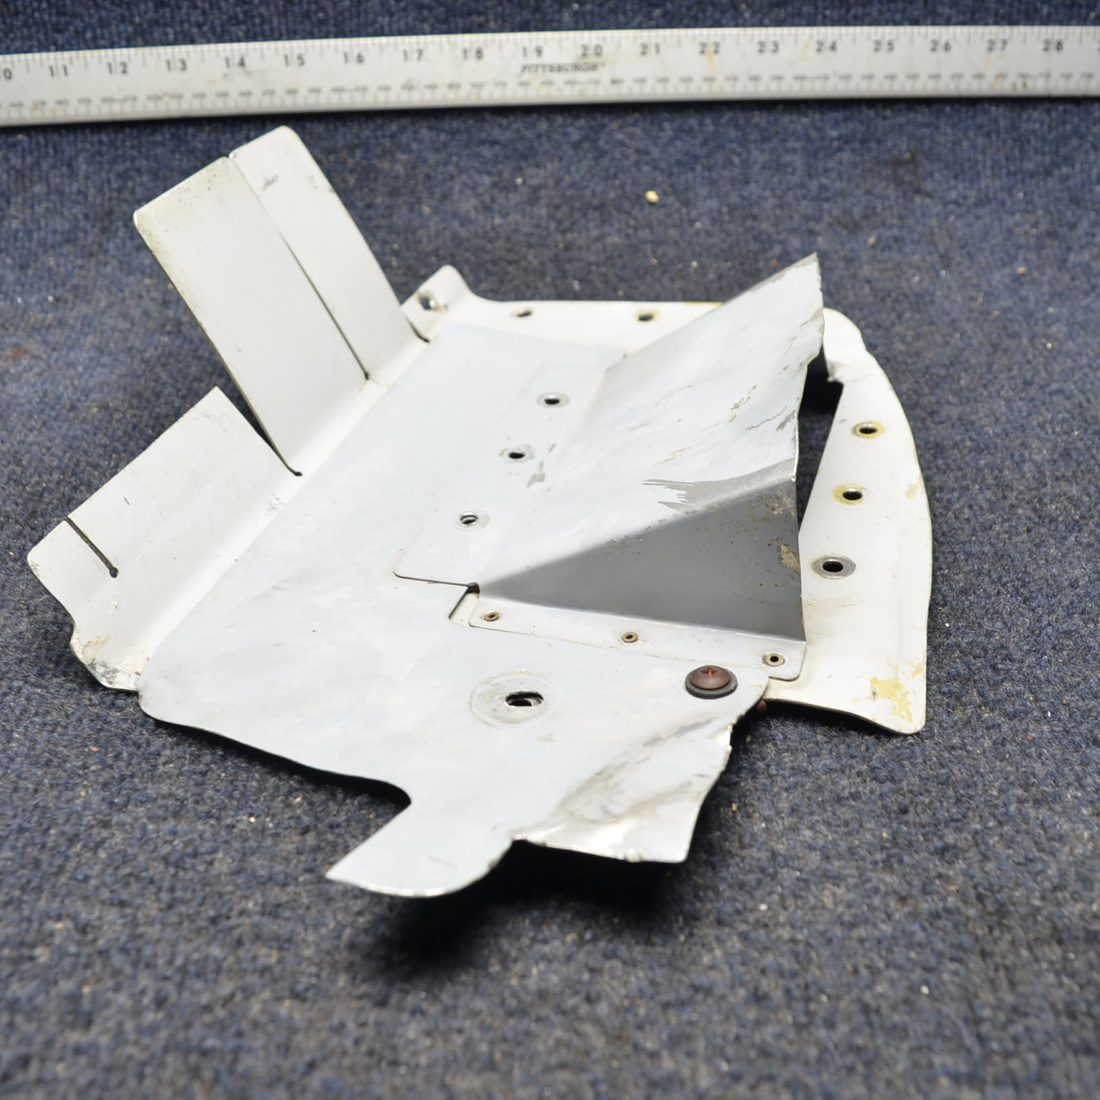 Used aircraft parts for sale, 502003-4 PIPER- CESSNA-BEECH- MOONEY VARIOS GRUMMAN FRONT SIDE BAFFLE